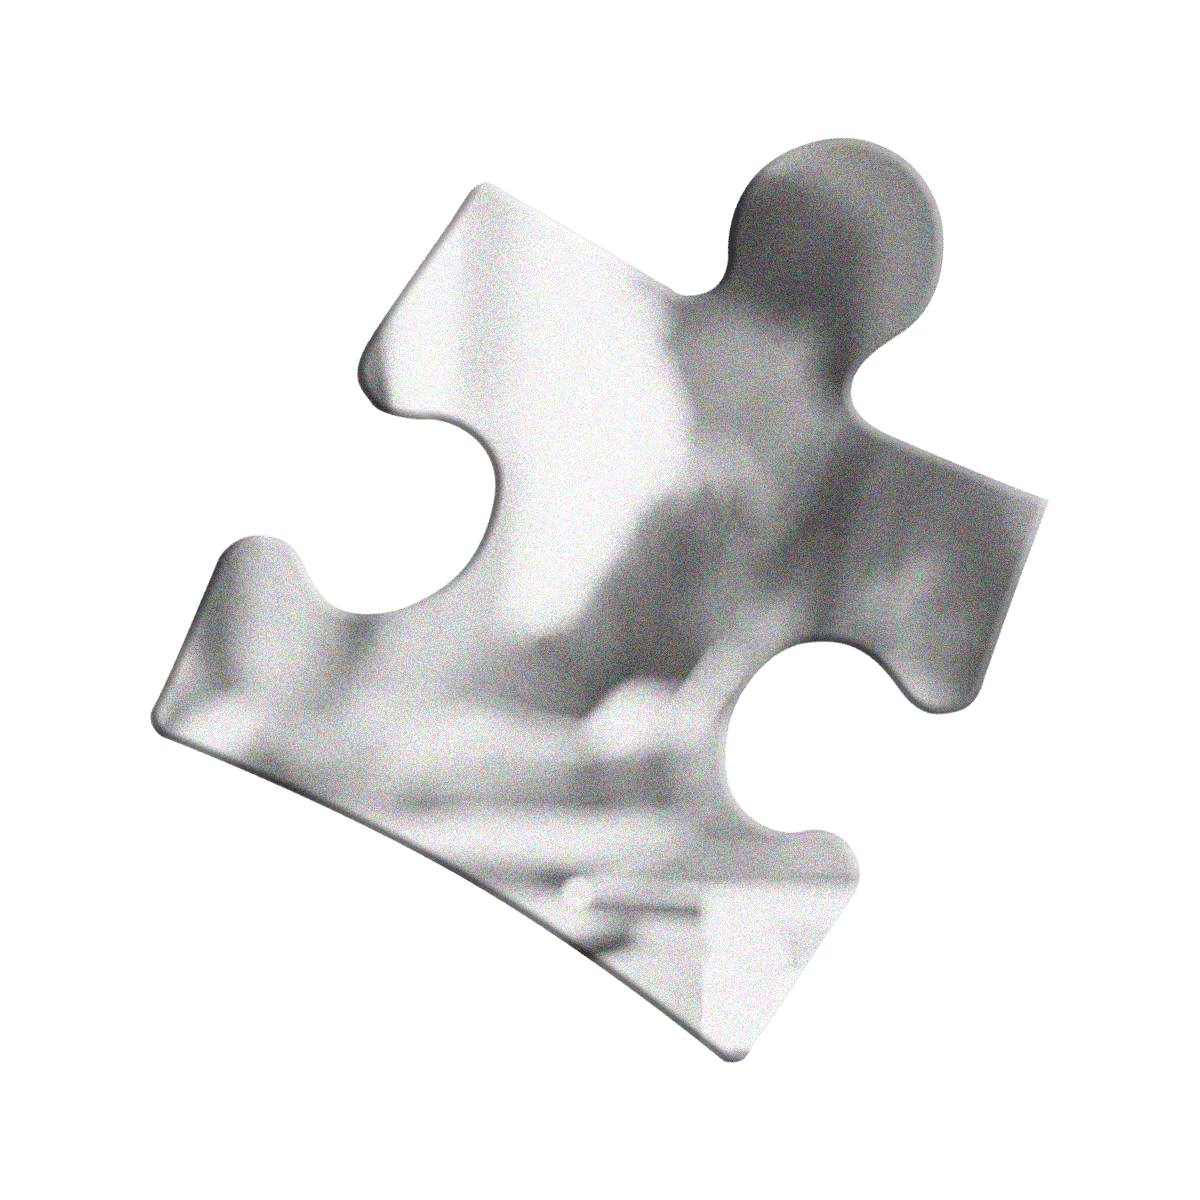 NP-Obect-Jigsaw-Rotated.png